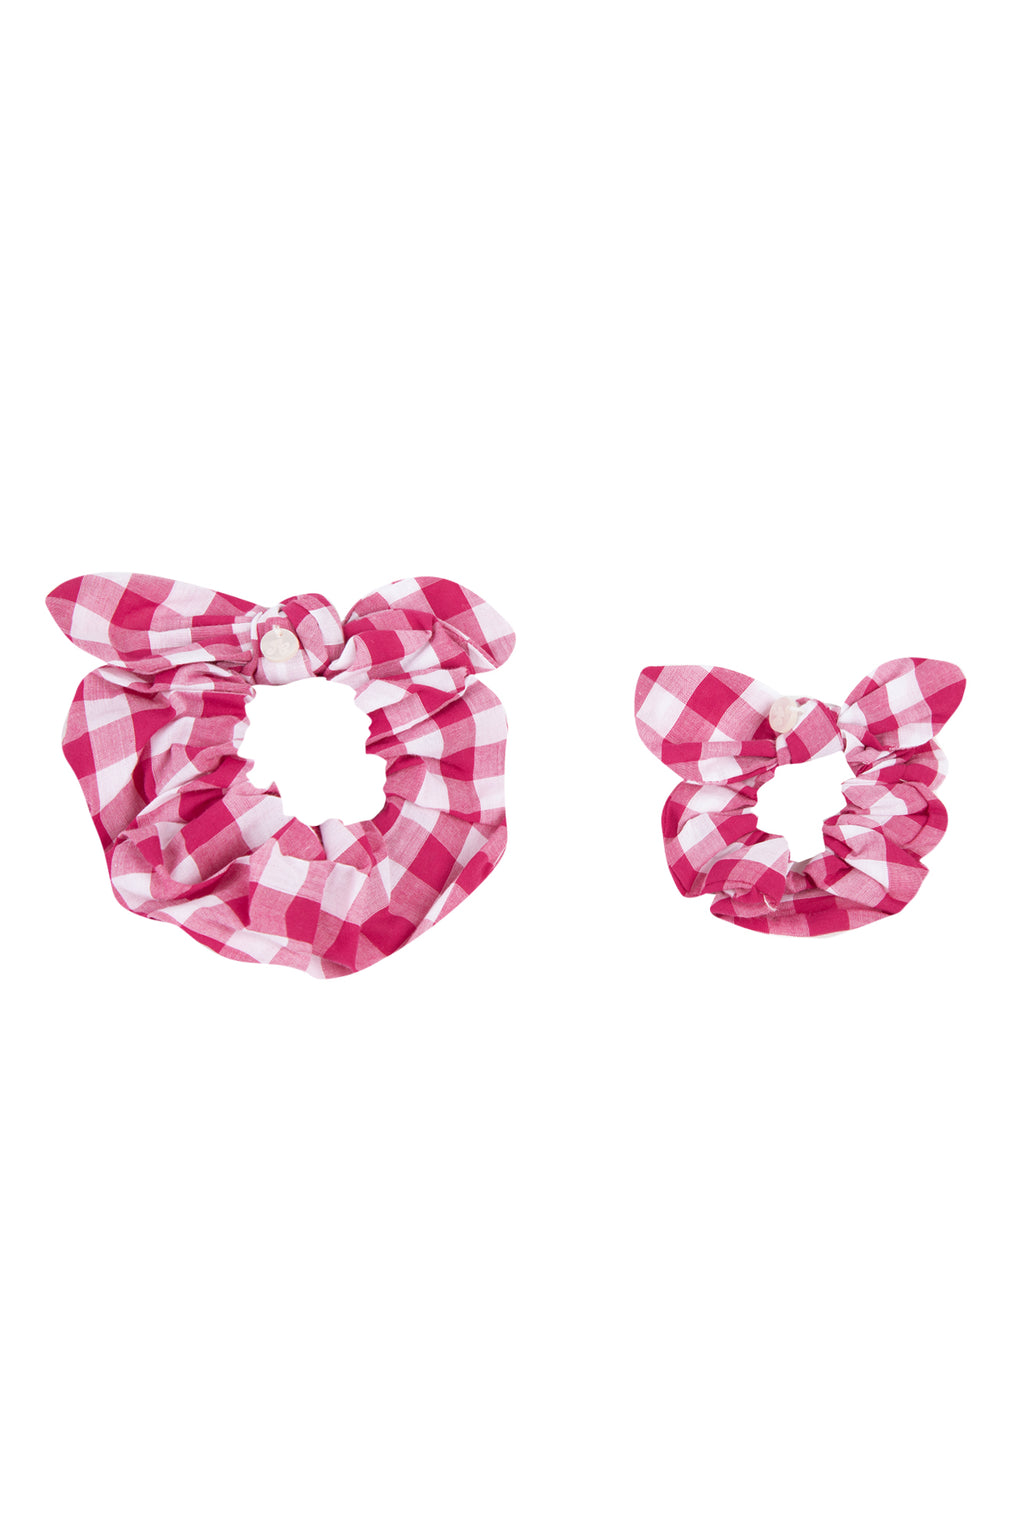 Scrunchie - Two-tone gingham Pink